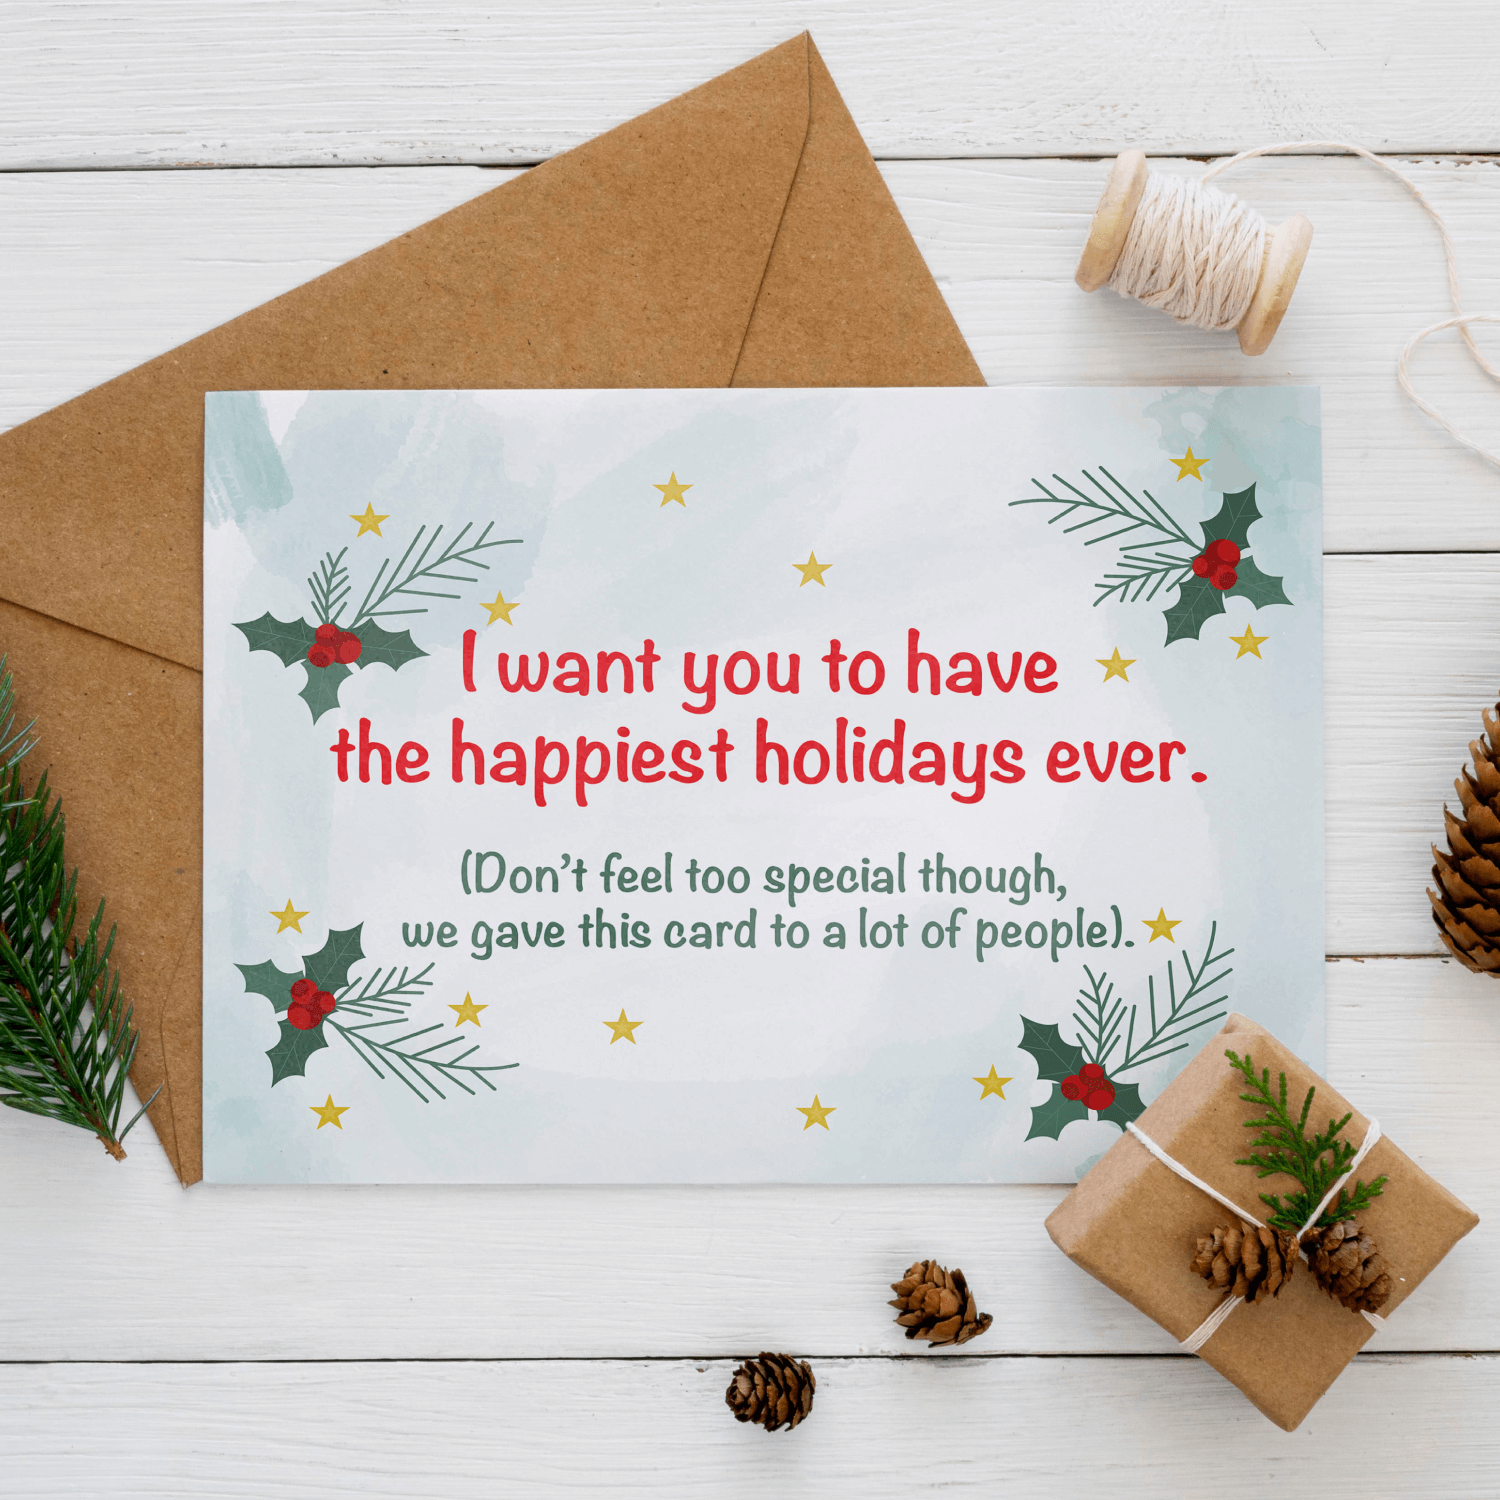 Free Christmas Card: I Want You to Have the Happiest Holidays Ever preview image.